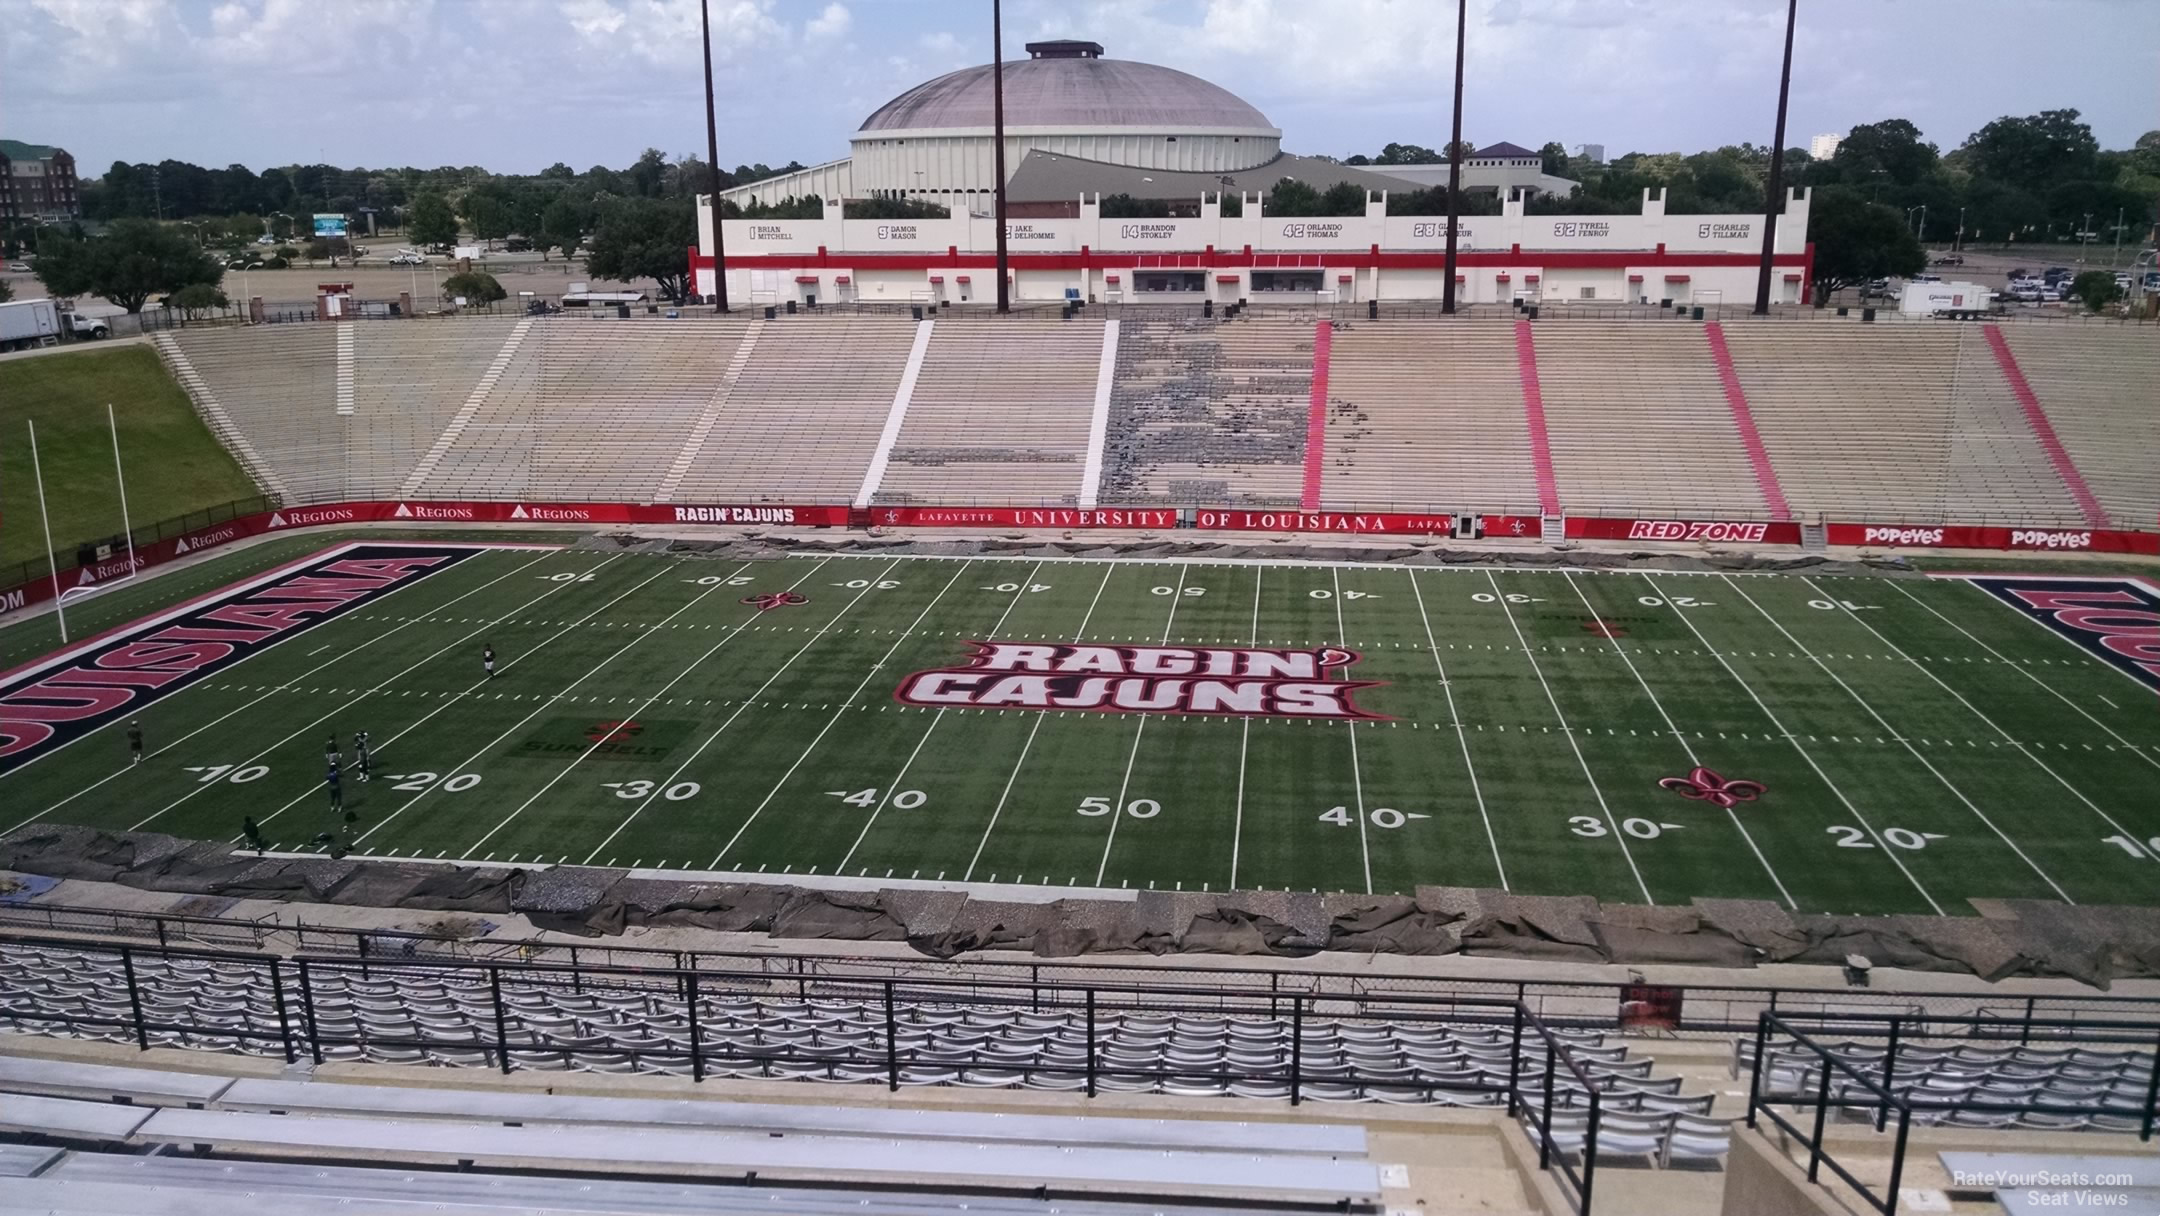 section dd, row 20 seat view  - cajun field